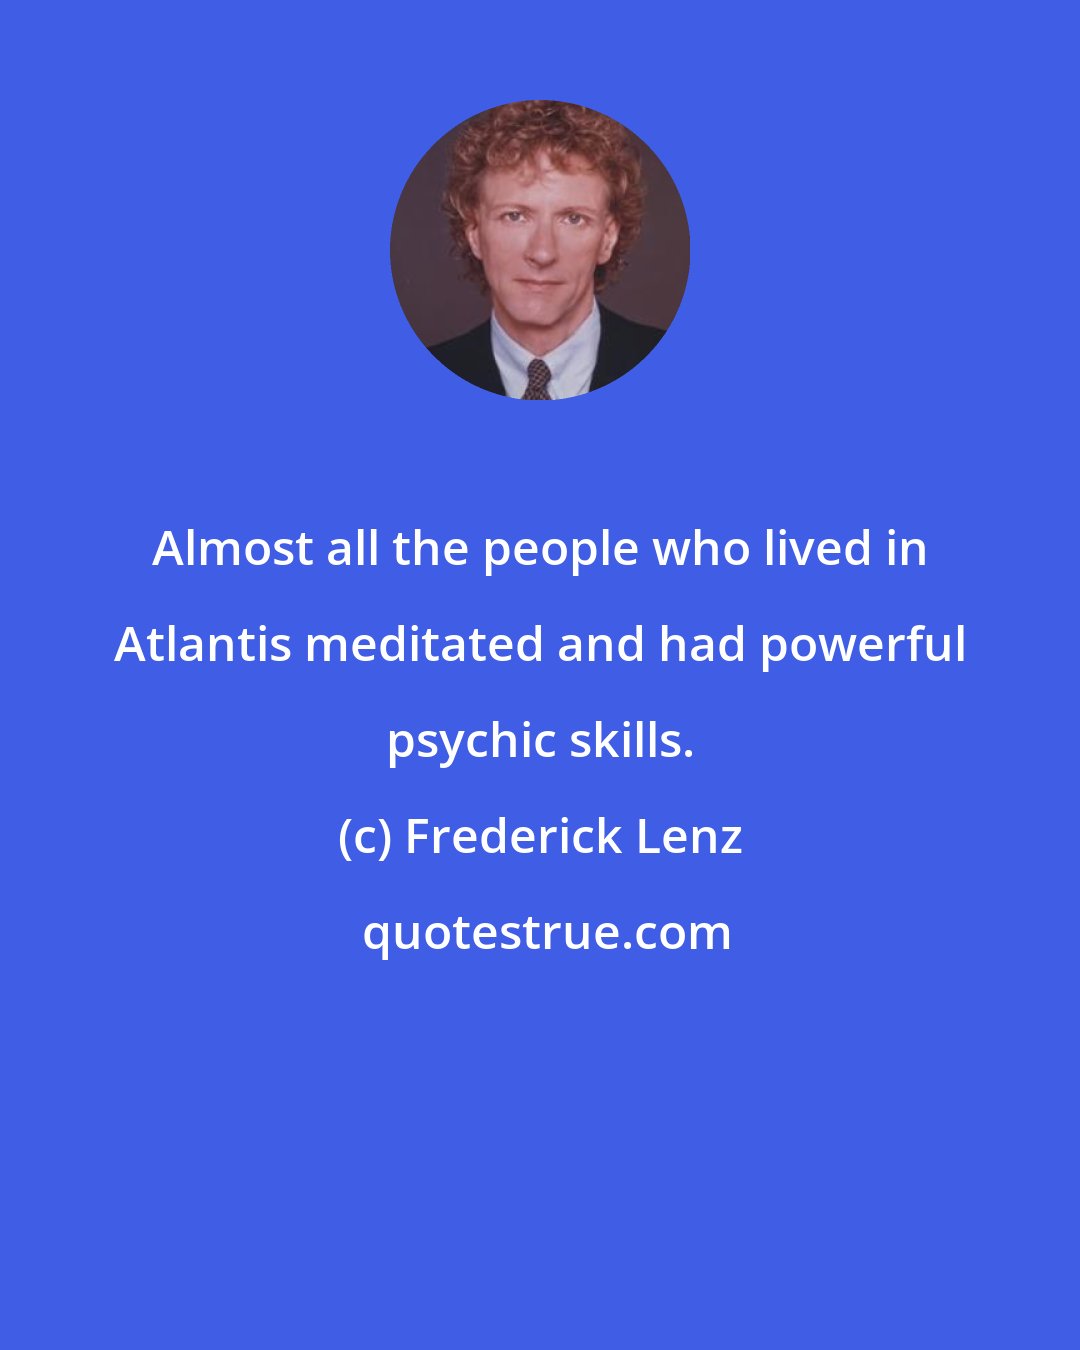 Frederick Lenz: Almost all the people who lived in Atlantis meditated and had powerful psychic skills.